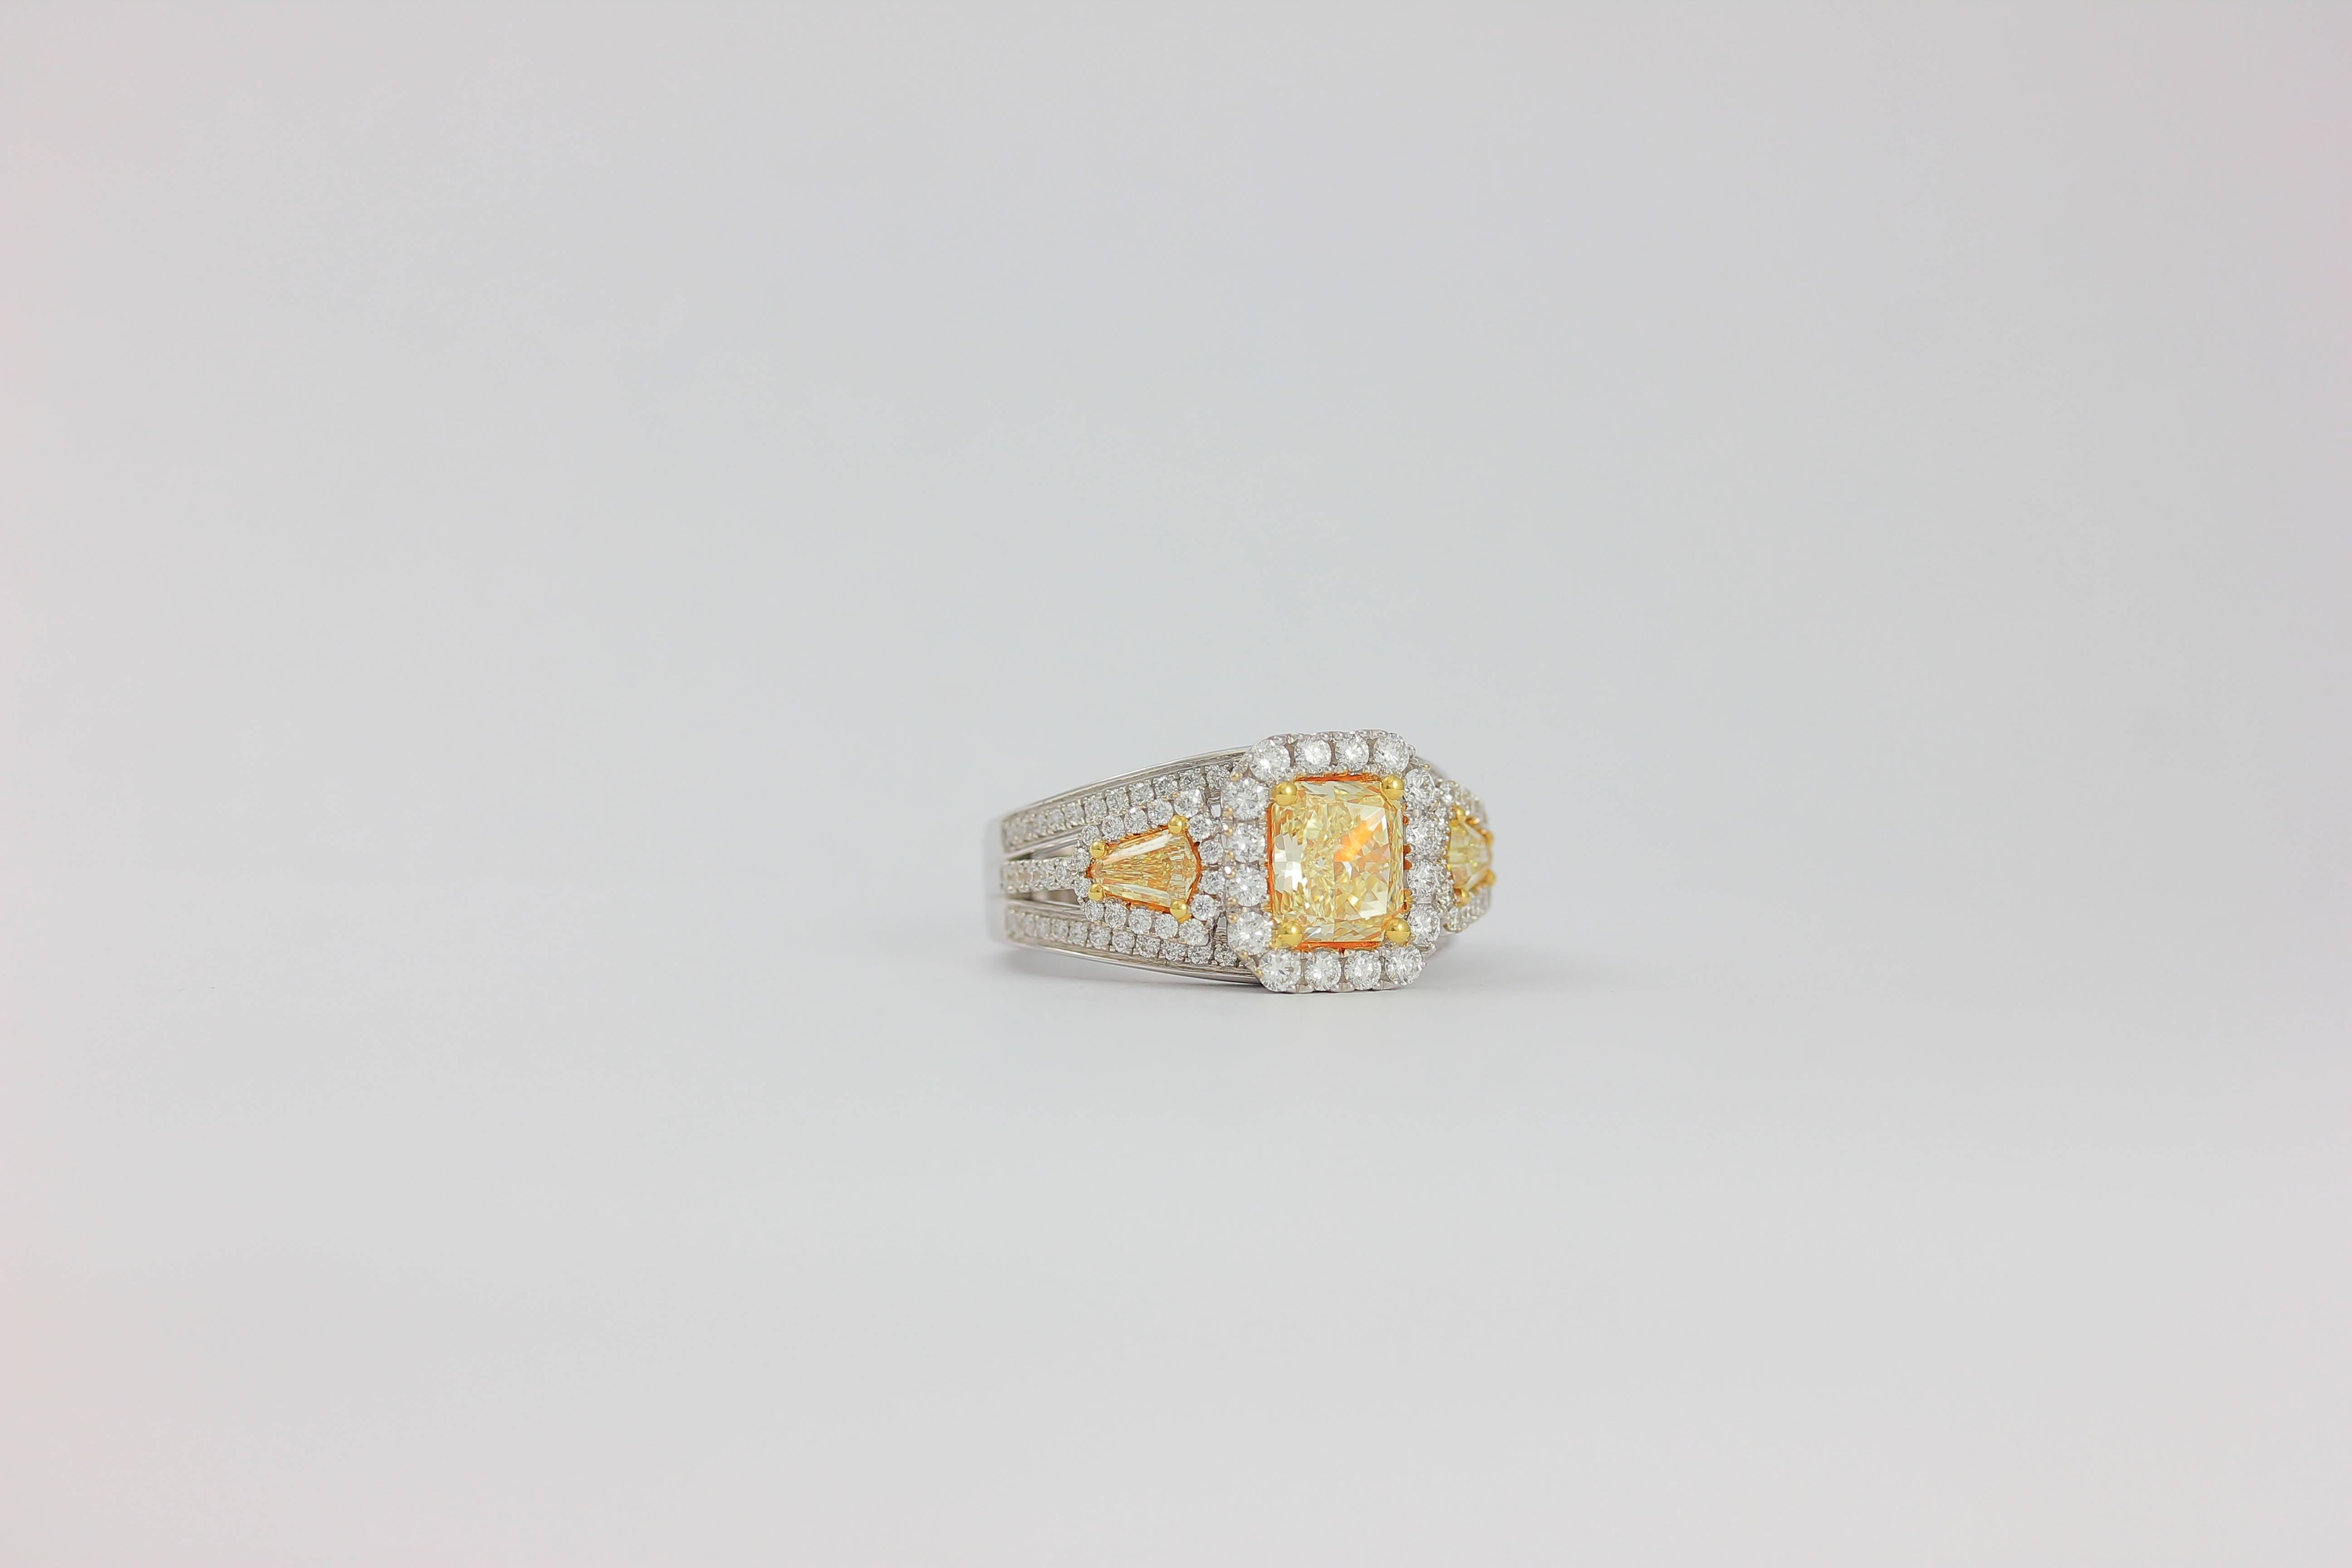 Contemporary Frederic Sage 1.78 Carat Yellow and White Diamonds Ring